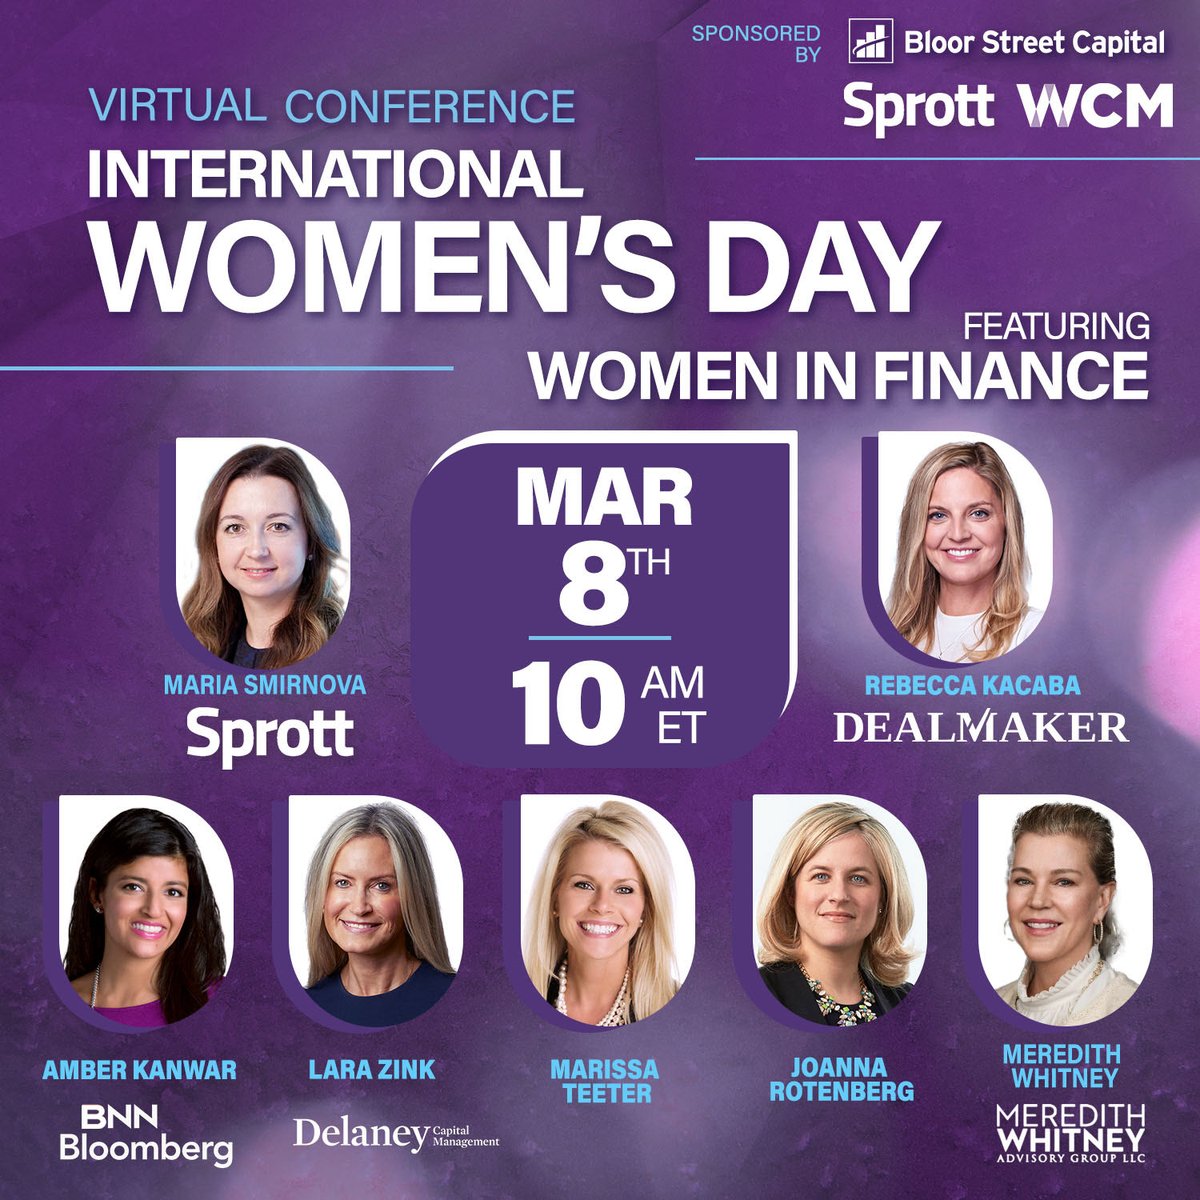 @BloorStreetCap along with @Sprott and Women in Capital Markets (WCM) are proud sponsors of a virtual conference celebrating Women in Finance on #IWD2024. Register at bit.ly/3UZxGRt